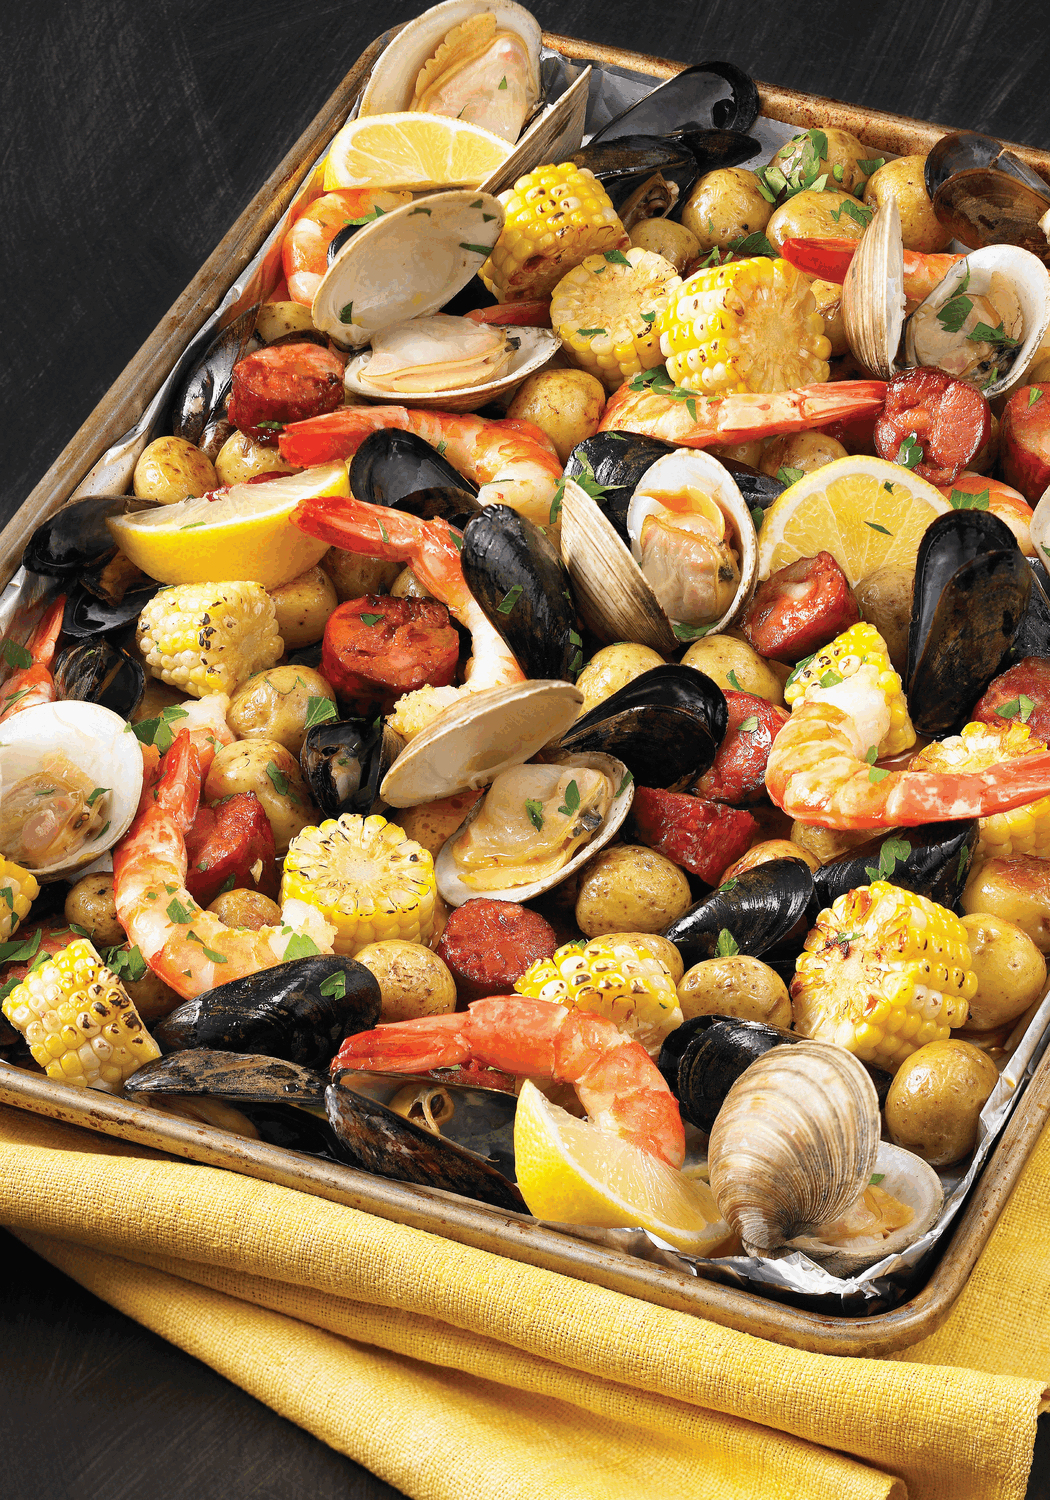 No need to head to the beach: this sheet pan preparation delivers the New England flavors of a classic clam bake to your kitchen anytime.